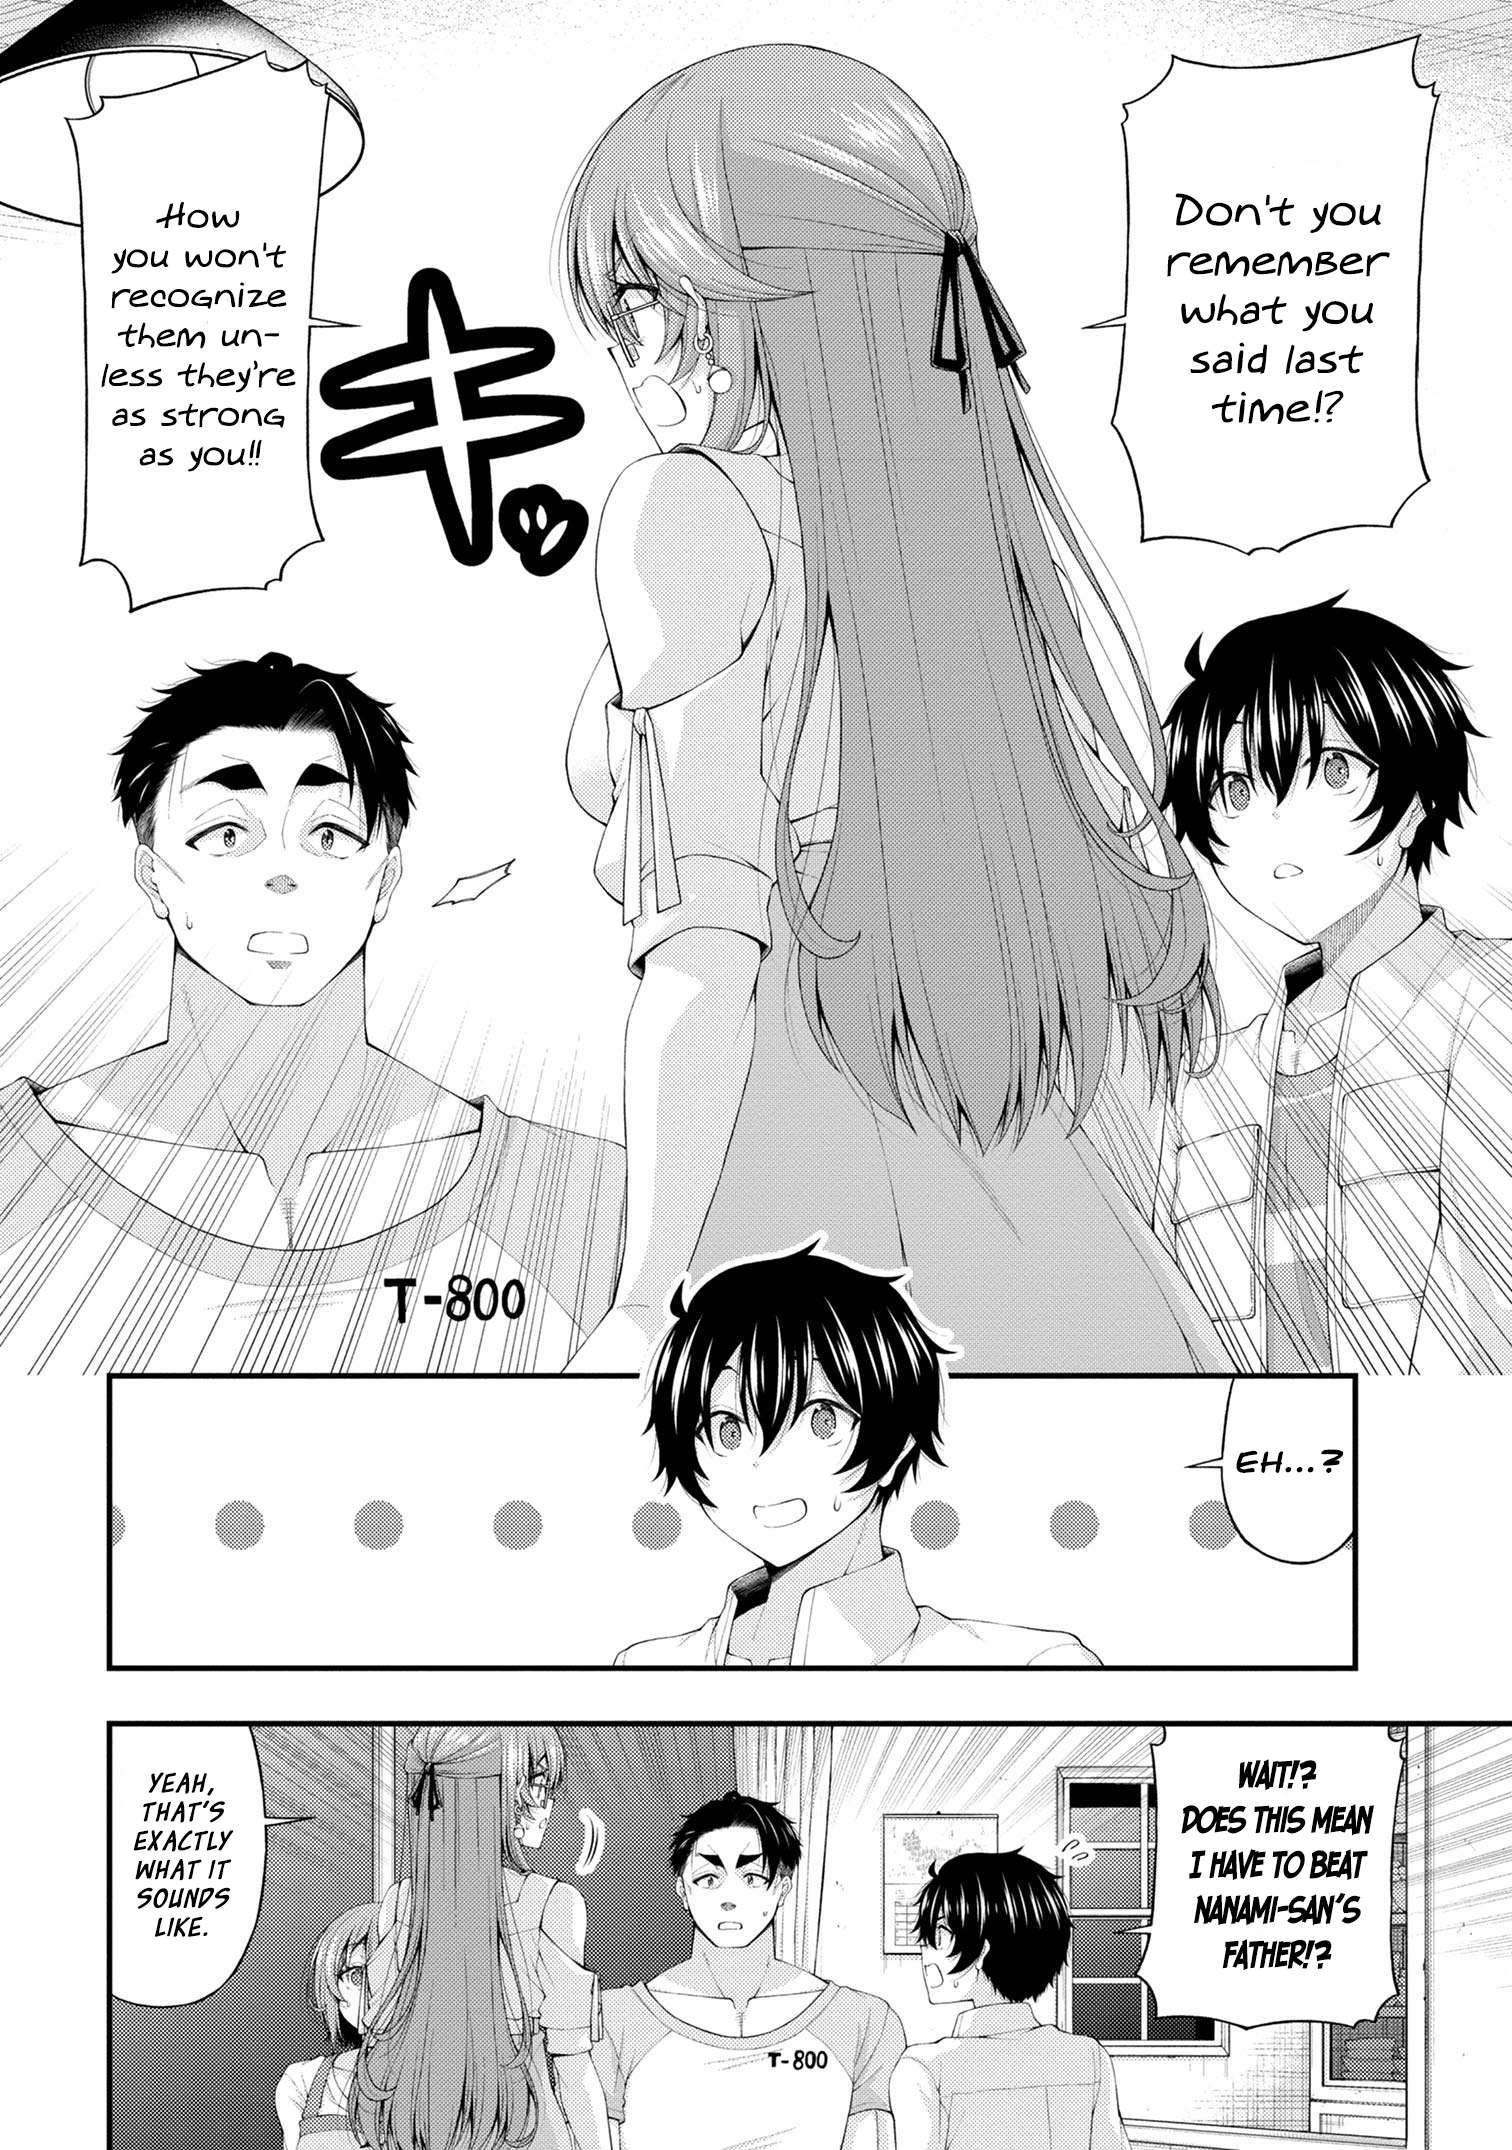 The Gal Who Was Meant to Confess to Me as a Game Punishment Has Apparently Fallen in Love with Me - chapter 12 - #2